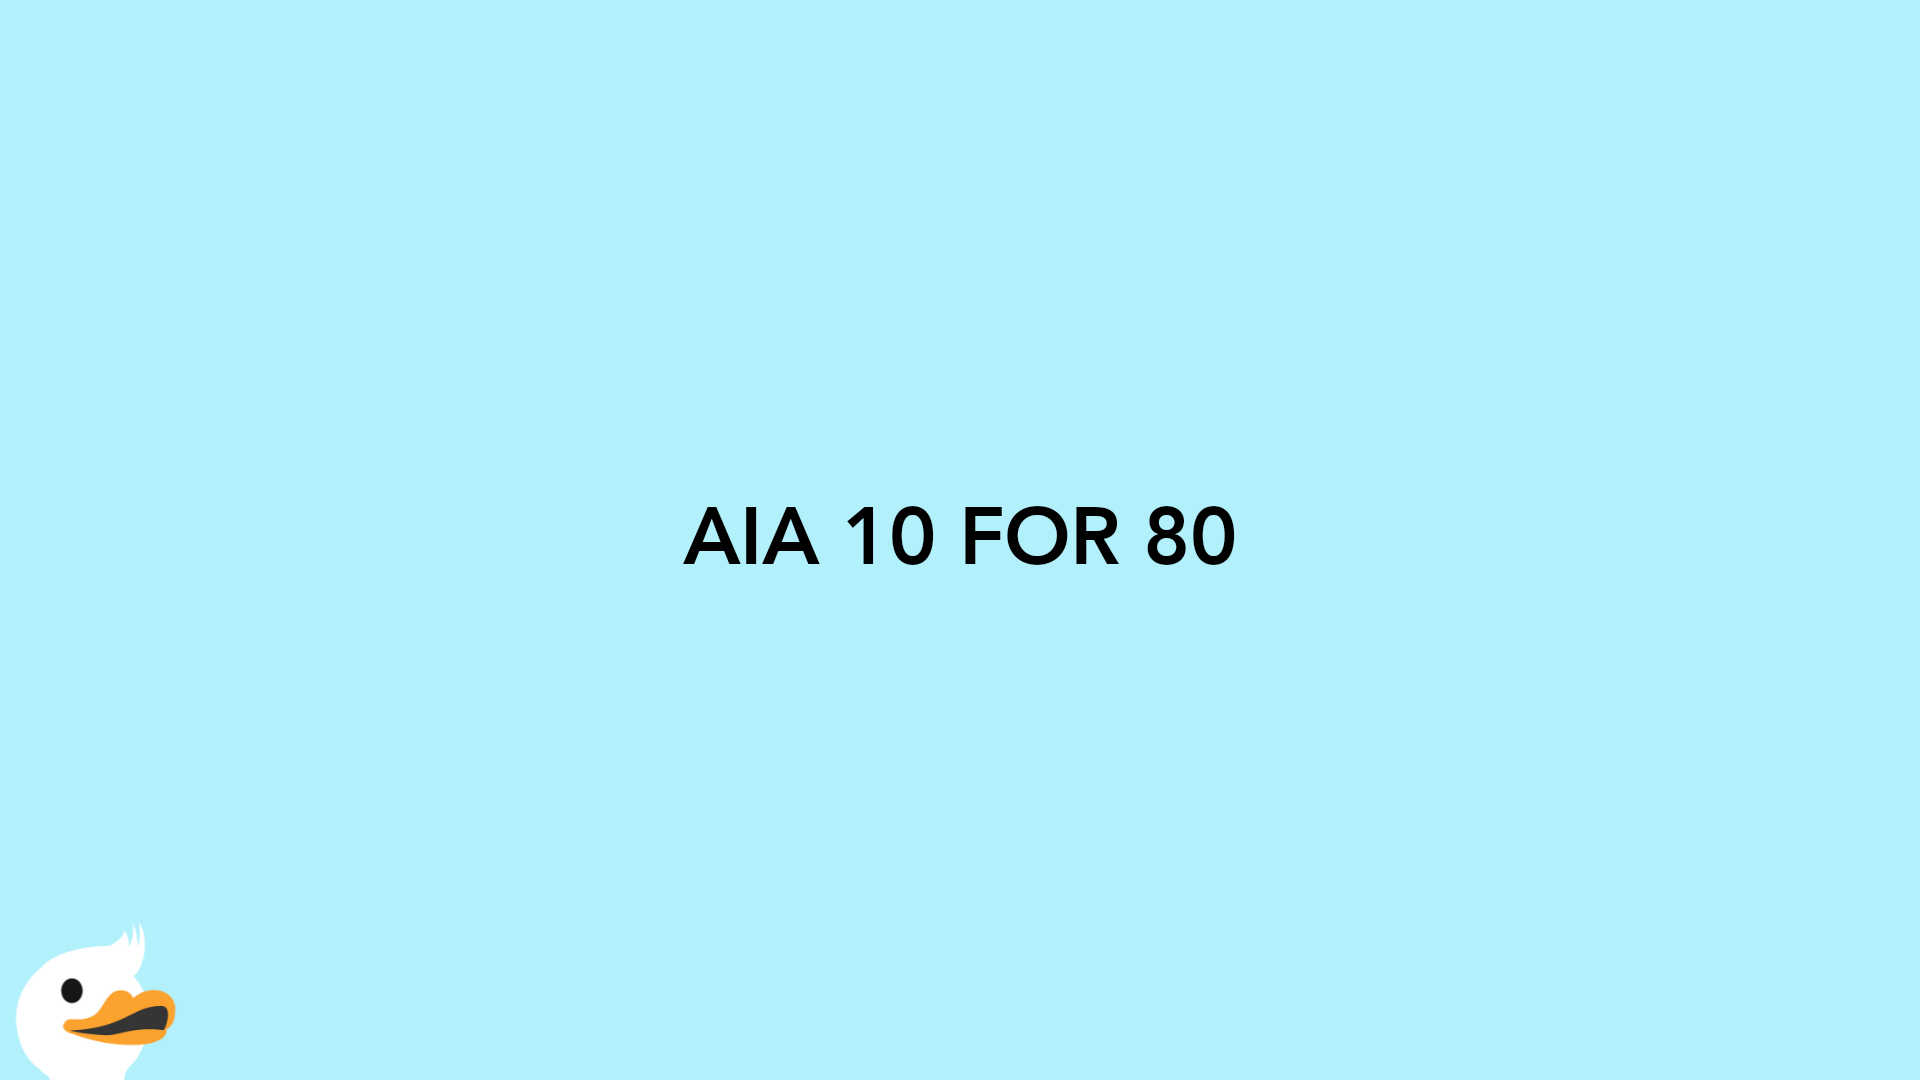 AIA 10 FOR 80